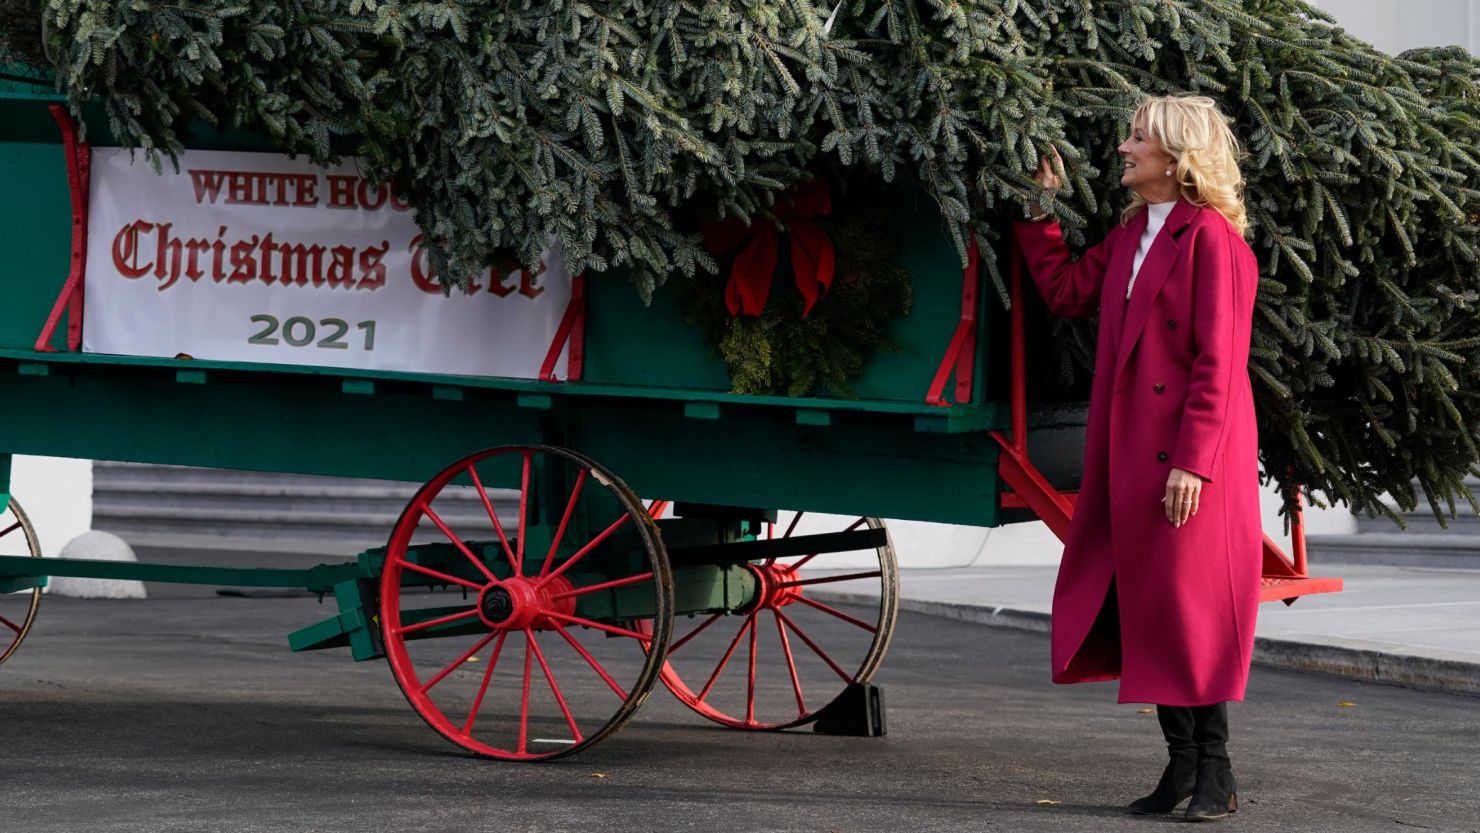 First lady Jill Biden receives the official 2021 White House Christmas tree at the White House, Monday, Nov. 22, 2021, in Washington. This year's tree is an 18.5-foot Fraser fir presented by Rusty and Beau Estes of Peak Farms in Jefferson, North Carolina.